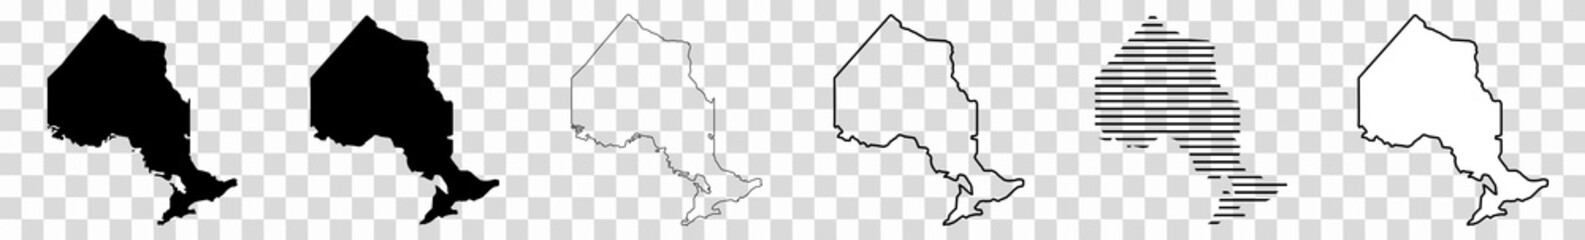 Ontario Map Black | Province Border | Canada State | Canadian | America | Transparent Isolated | Variations